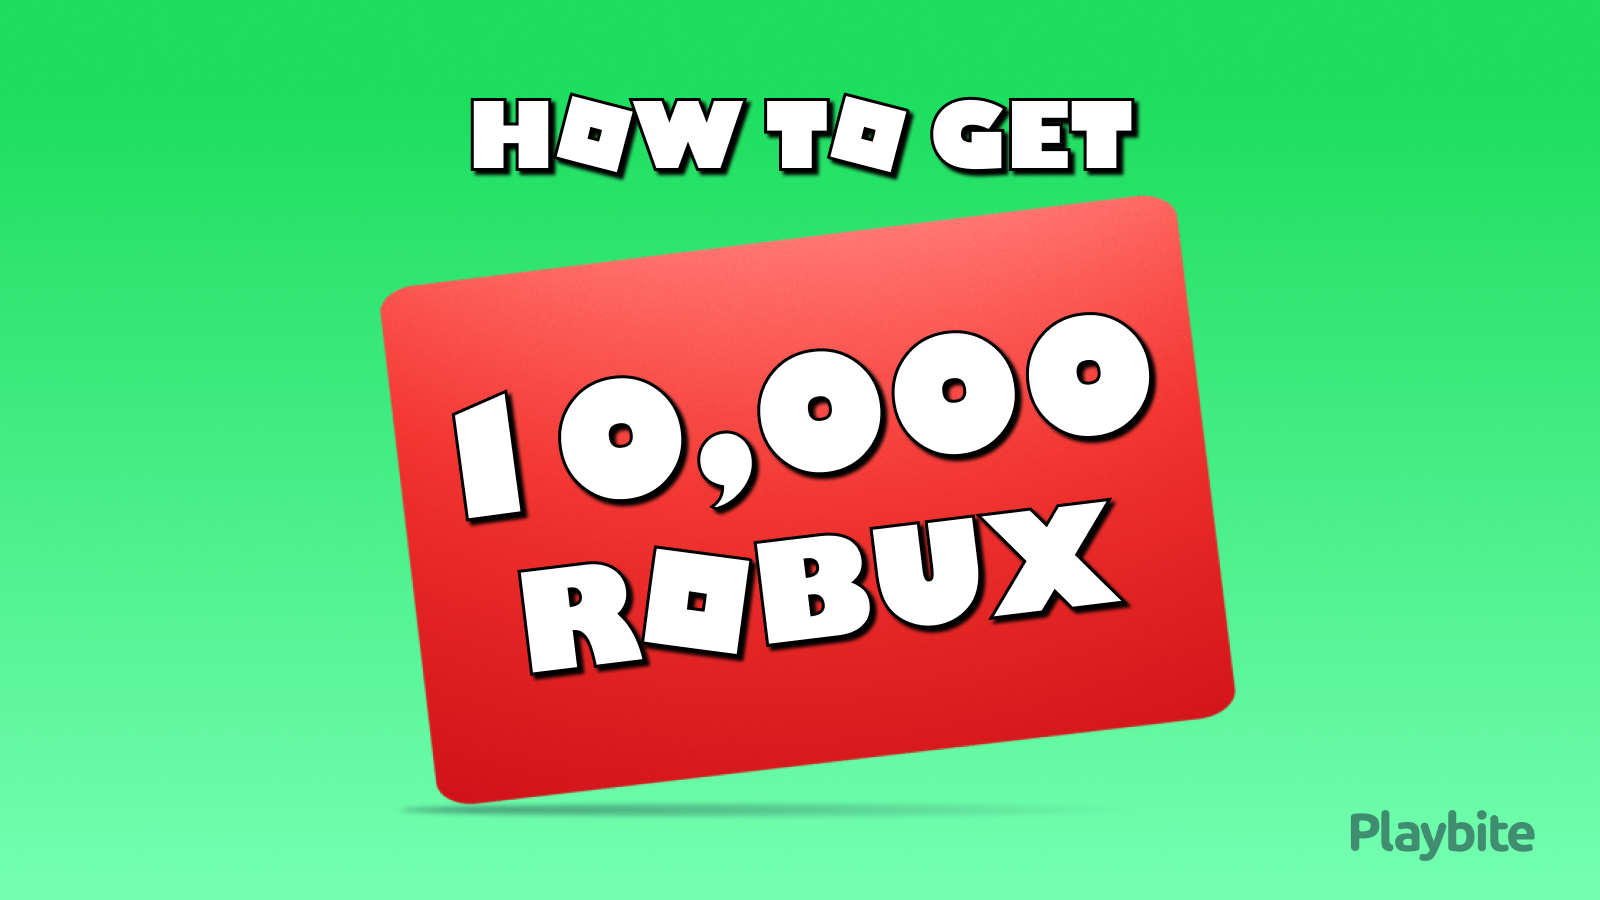 How To Get 10000 Robux For Free